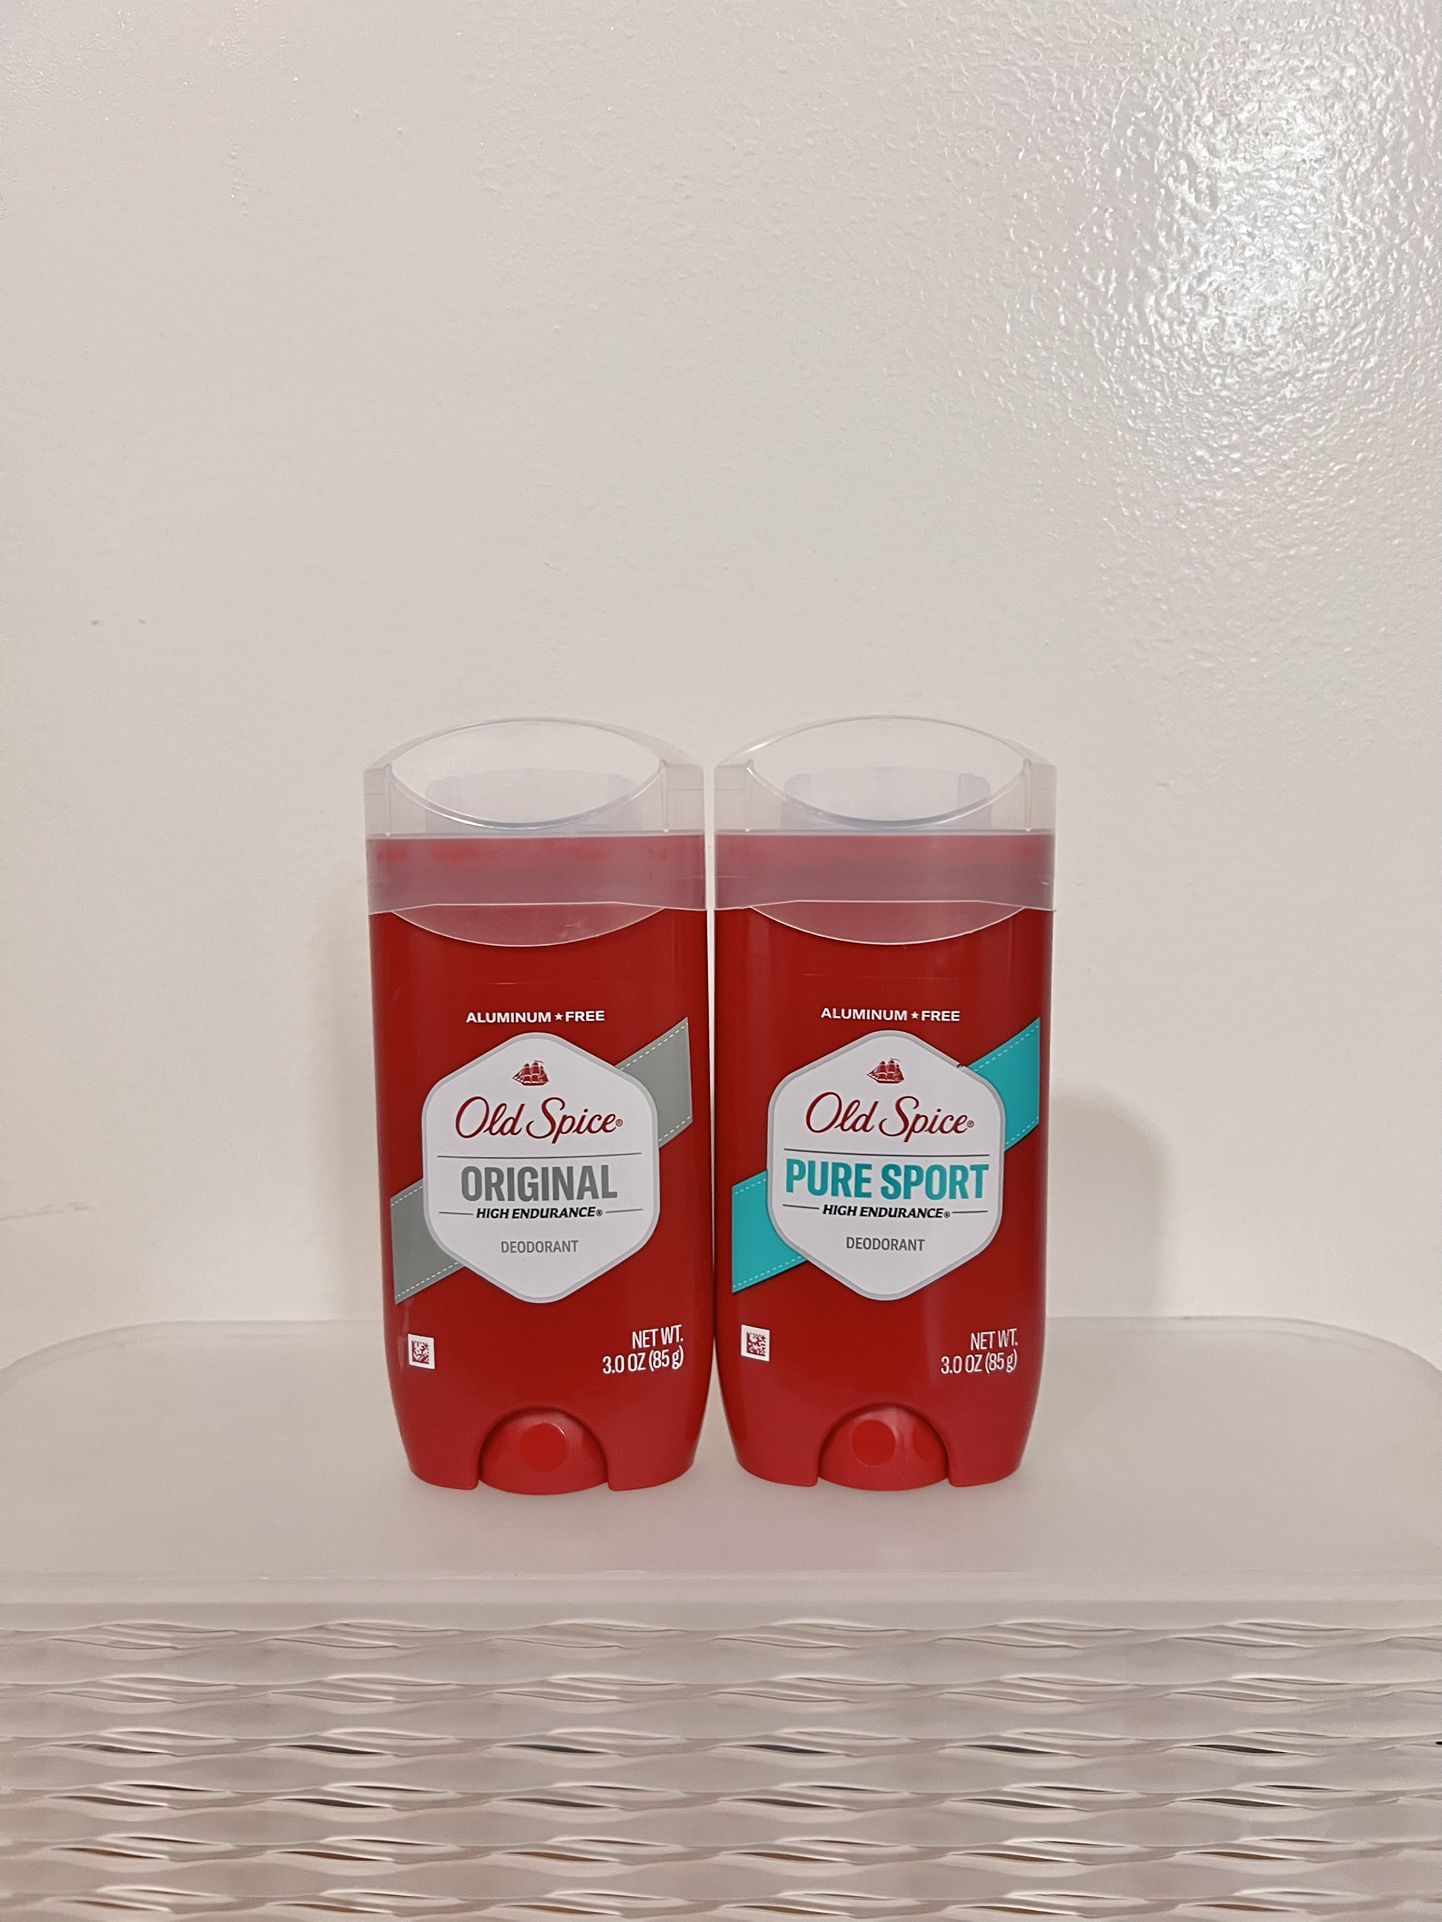 Old Spice Deodorant $4 Each